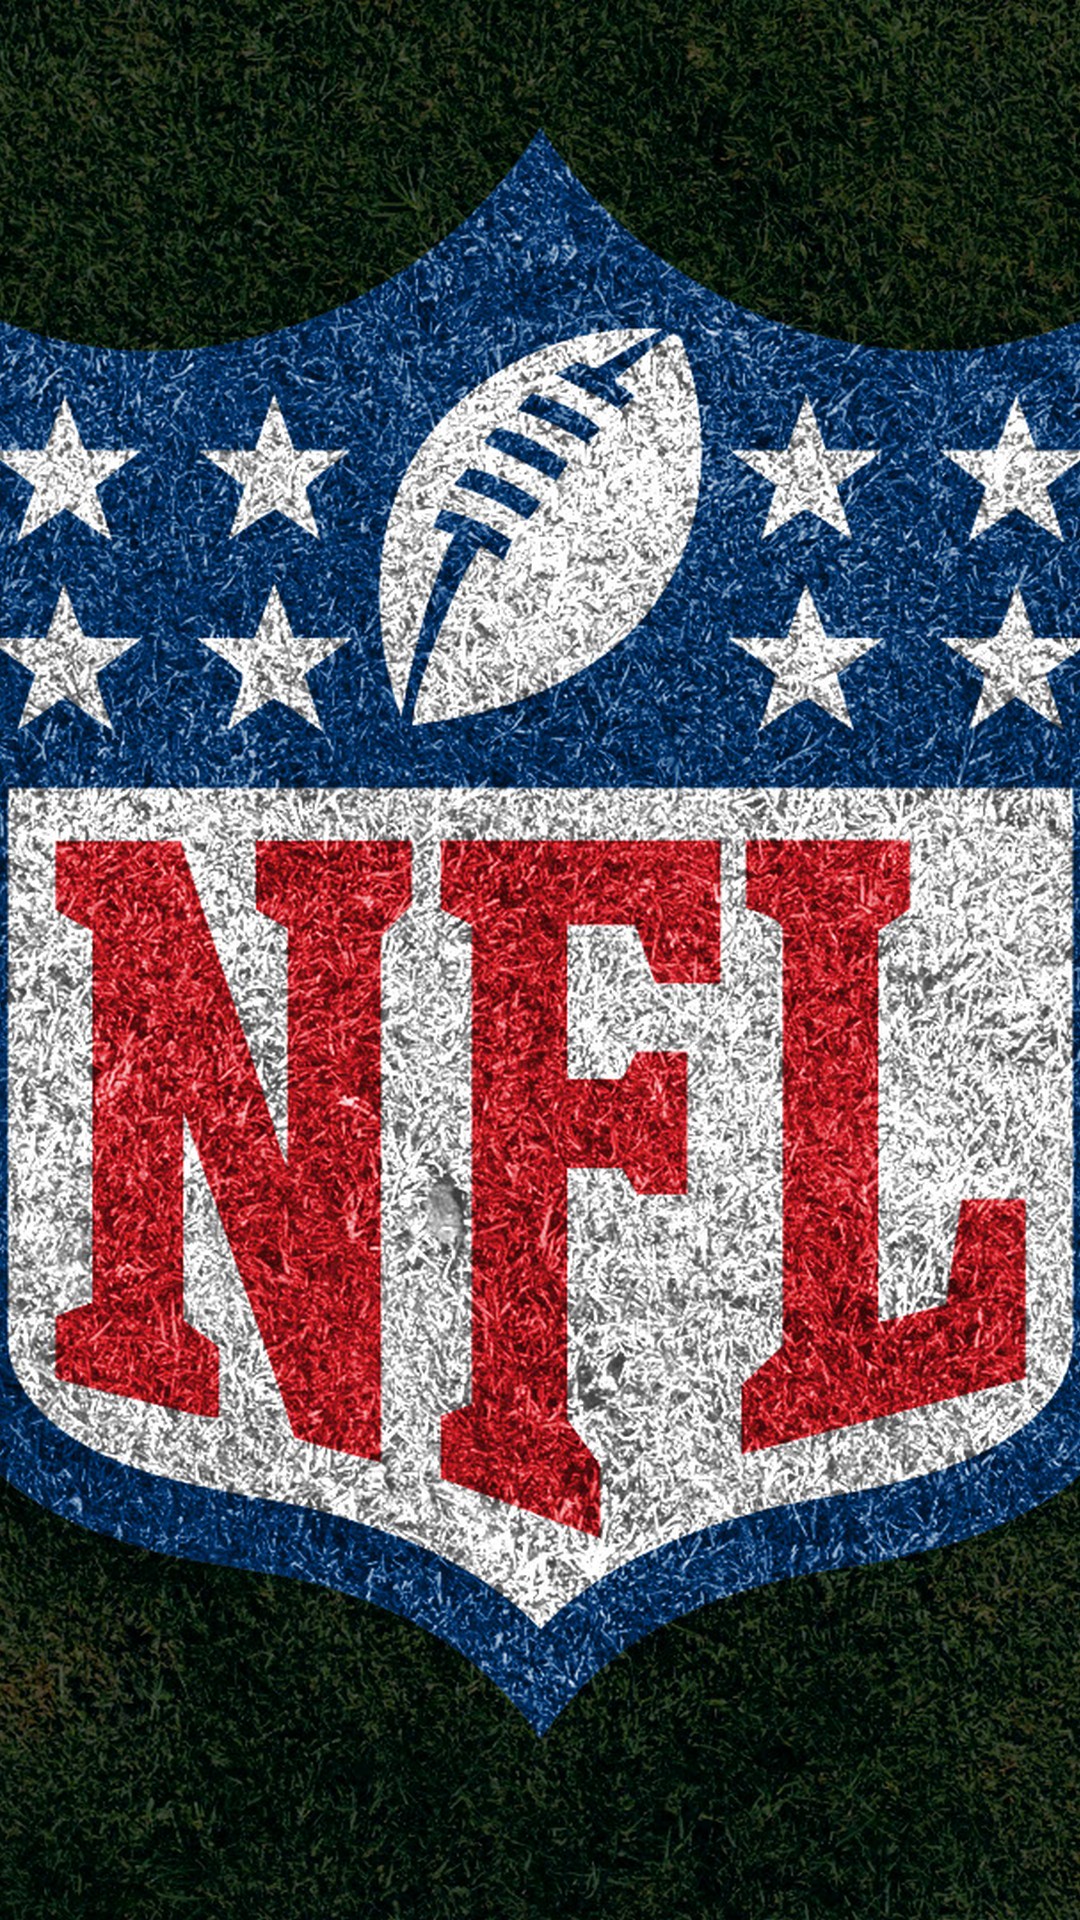 NFL iPhone Wallpaper Design With high-resolution 1080X1920 pixel. Download and set as wallpaper for Apple iPhone X, XS Max, XR, 8, 7, 6, SE, iPad, Android